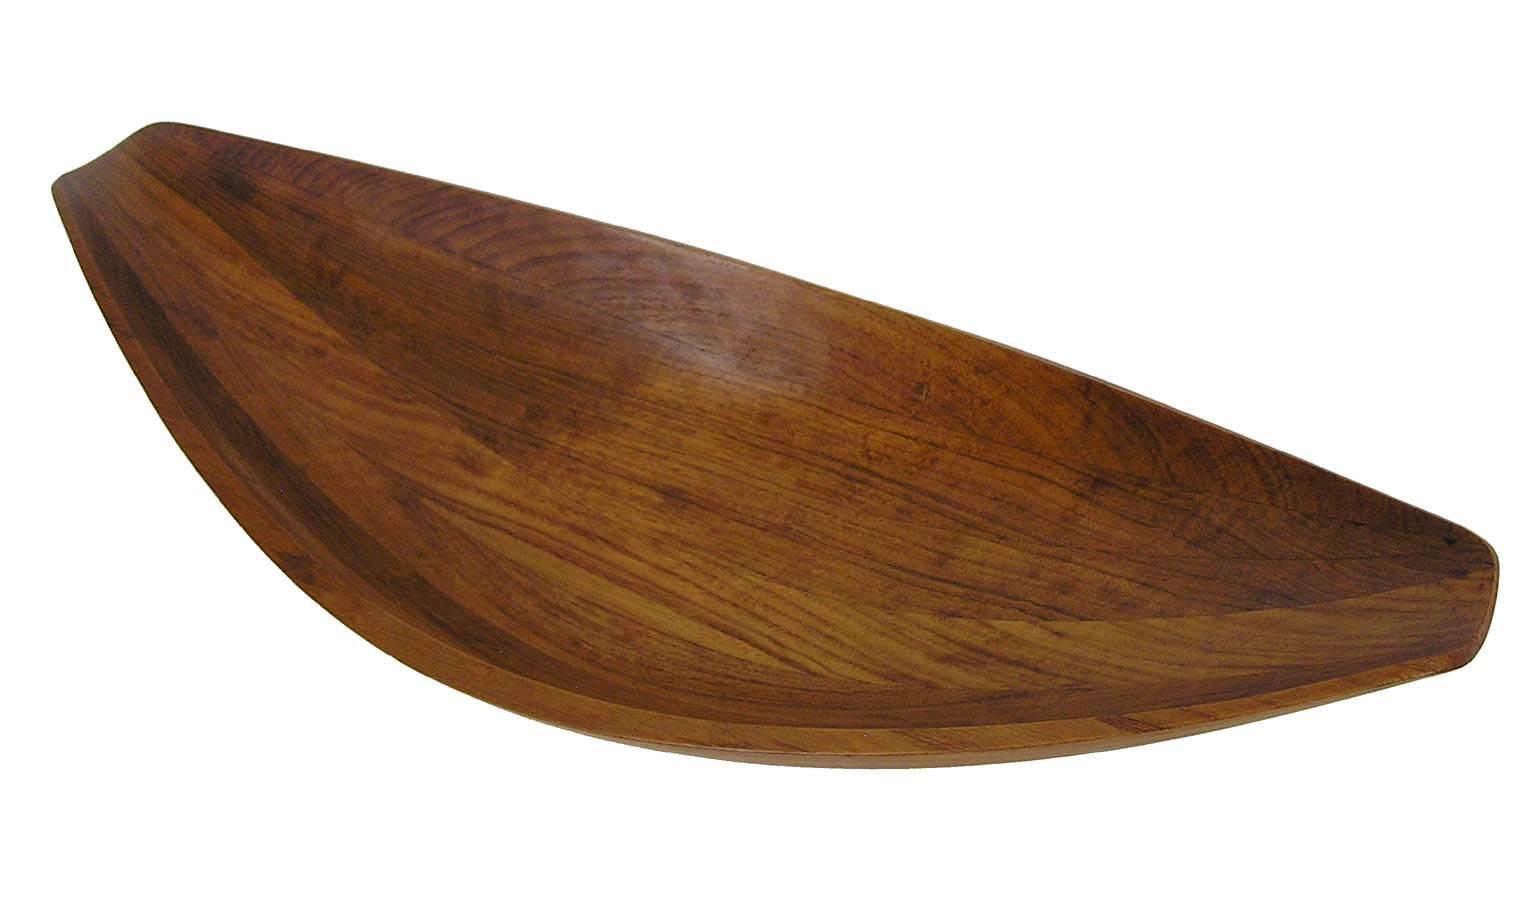 A beautiful staved teak bowl from the 1950s designed by Jens Quistgaard for Dansk of Denmark. Commonly referred to as the 